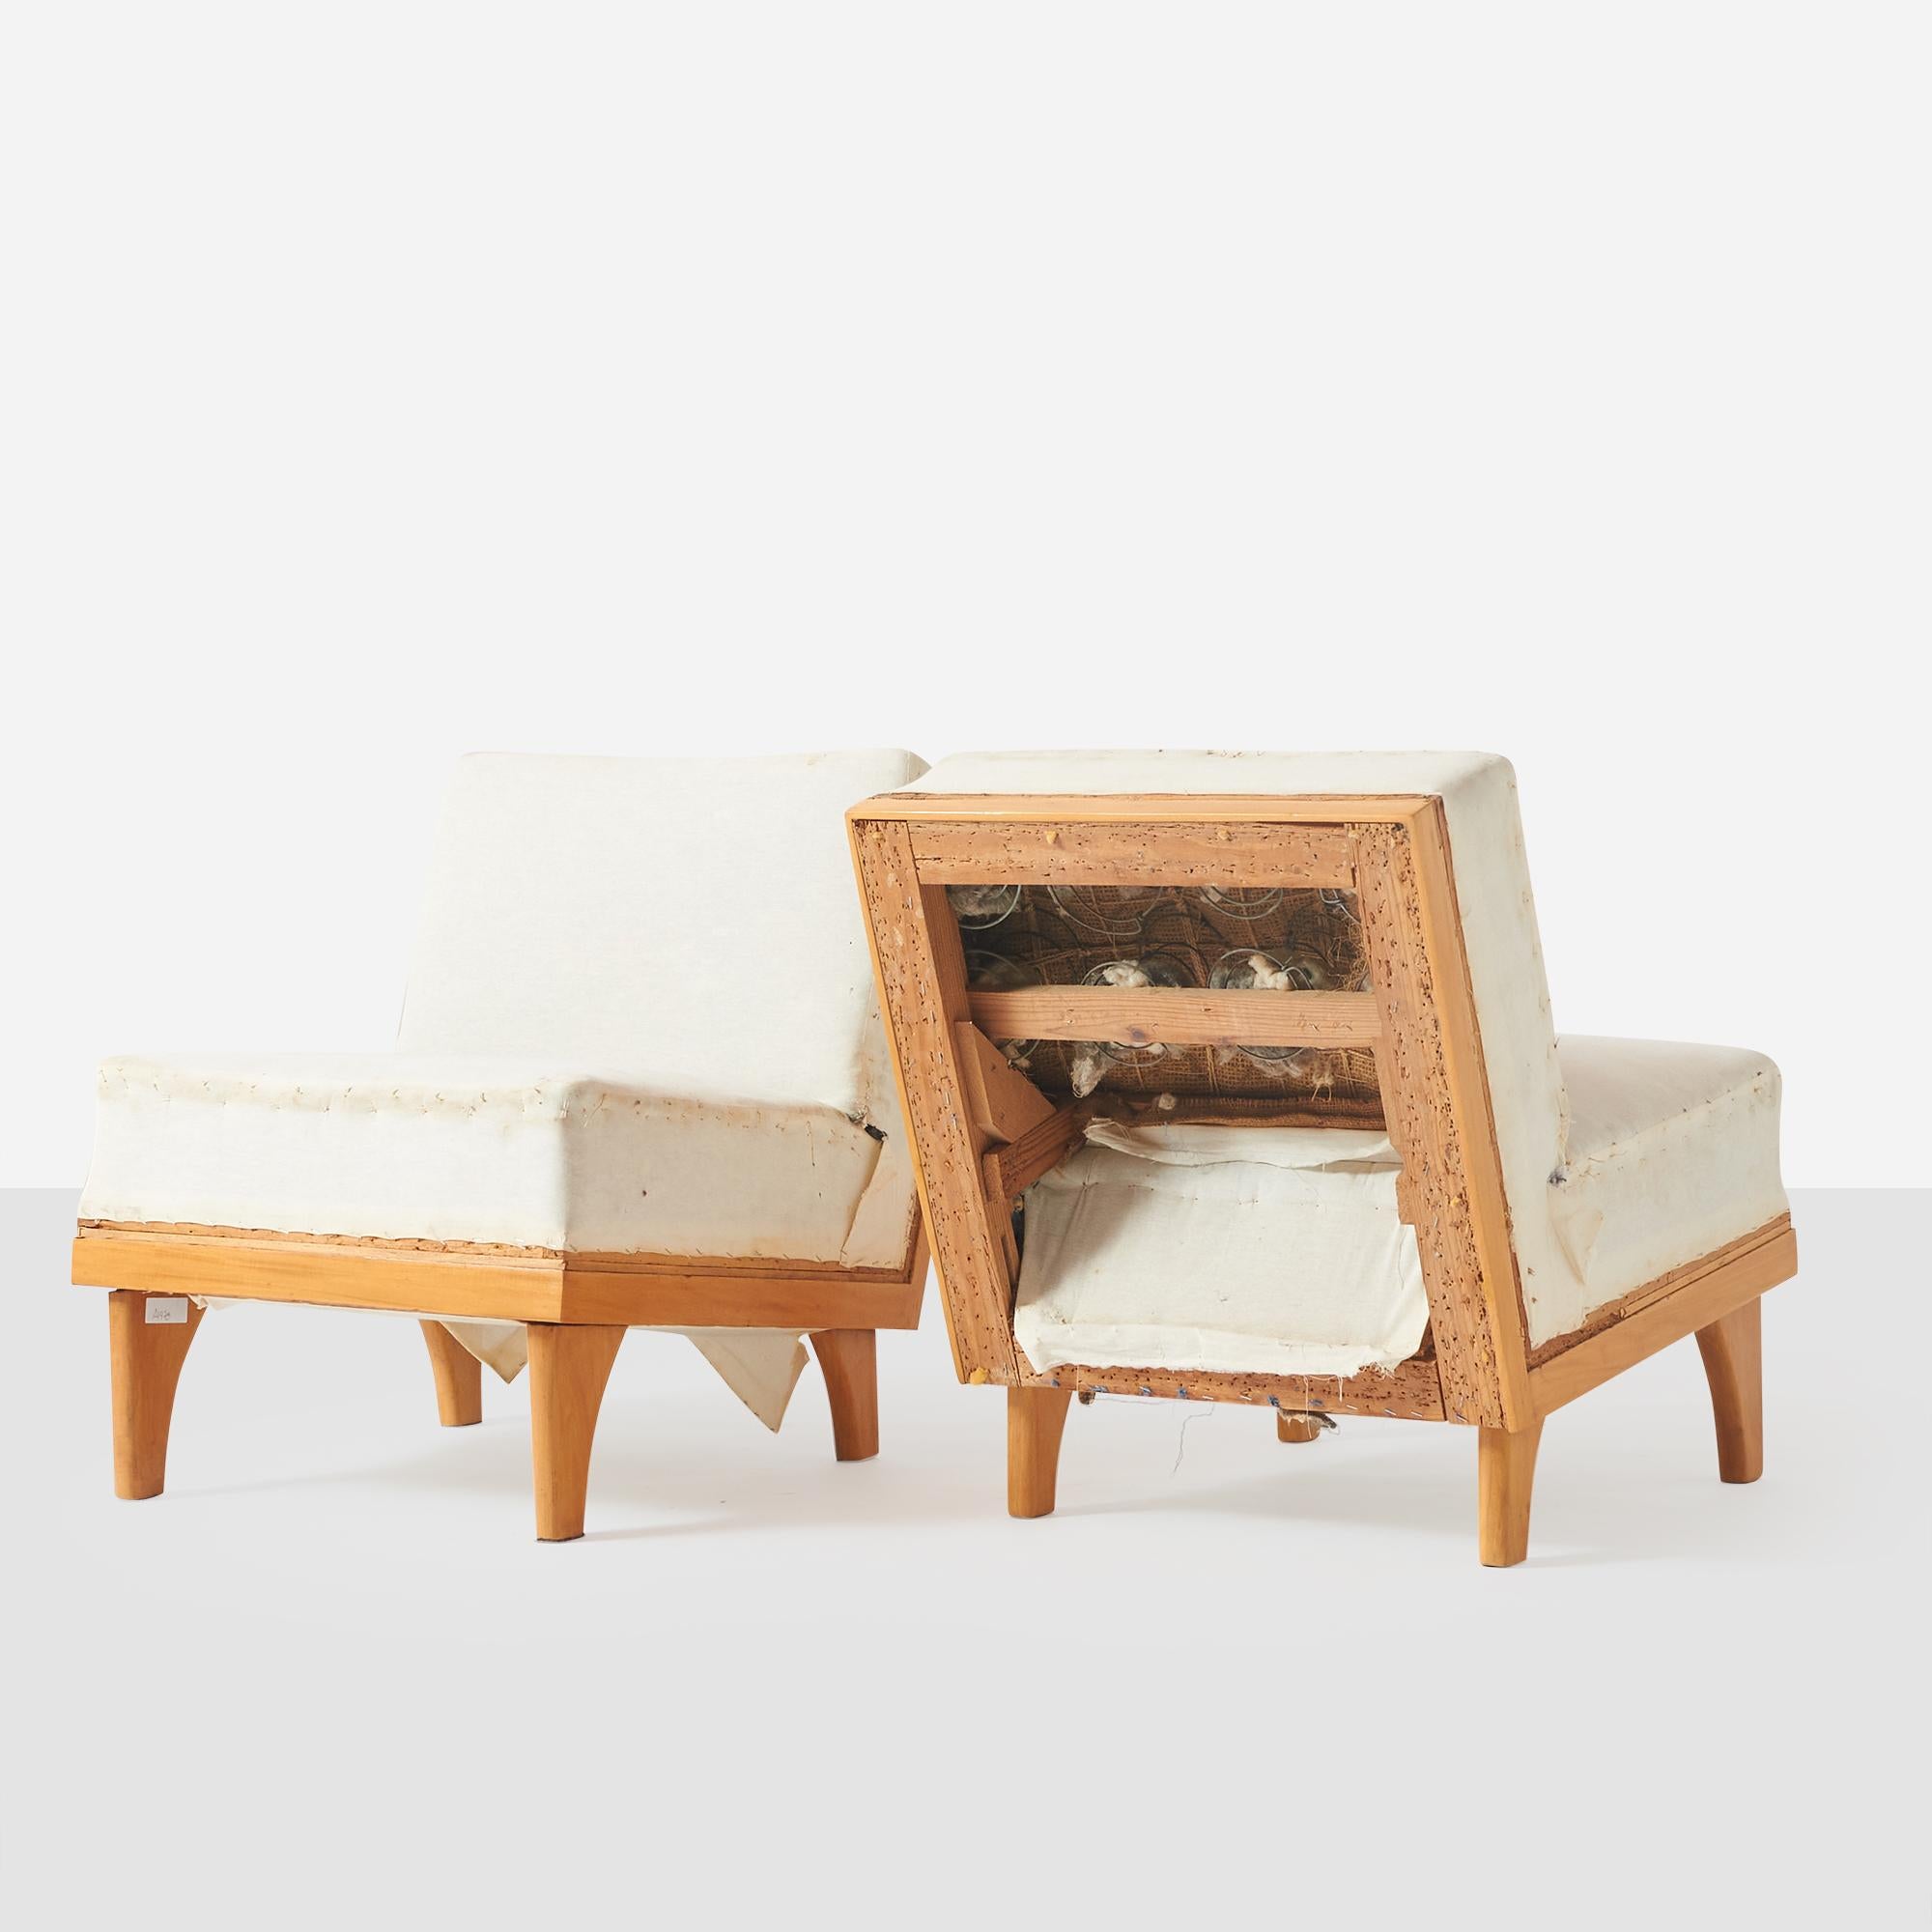 A pair of canted Lounge chairs with unusual form legs for Domus with the frame in pine. Ready for restoration.

Bibliography: 